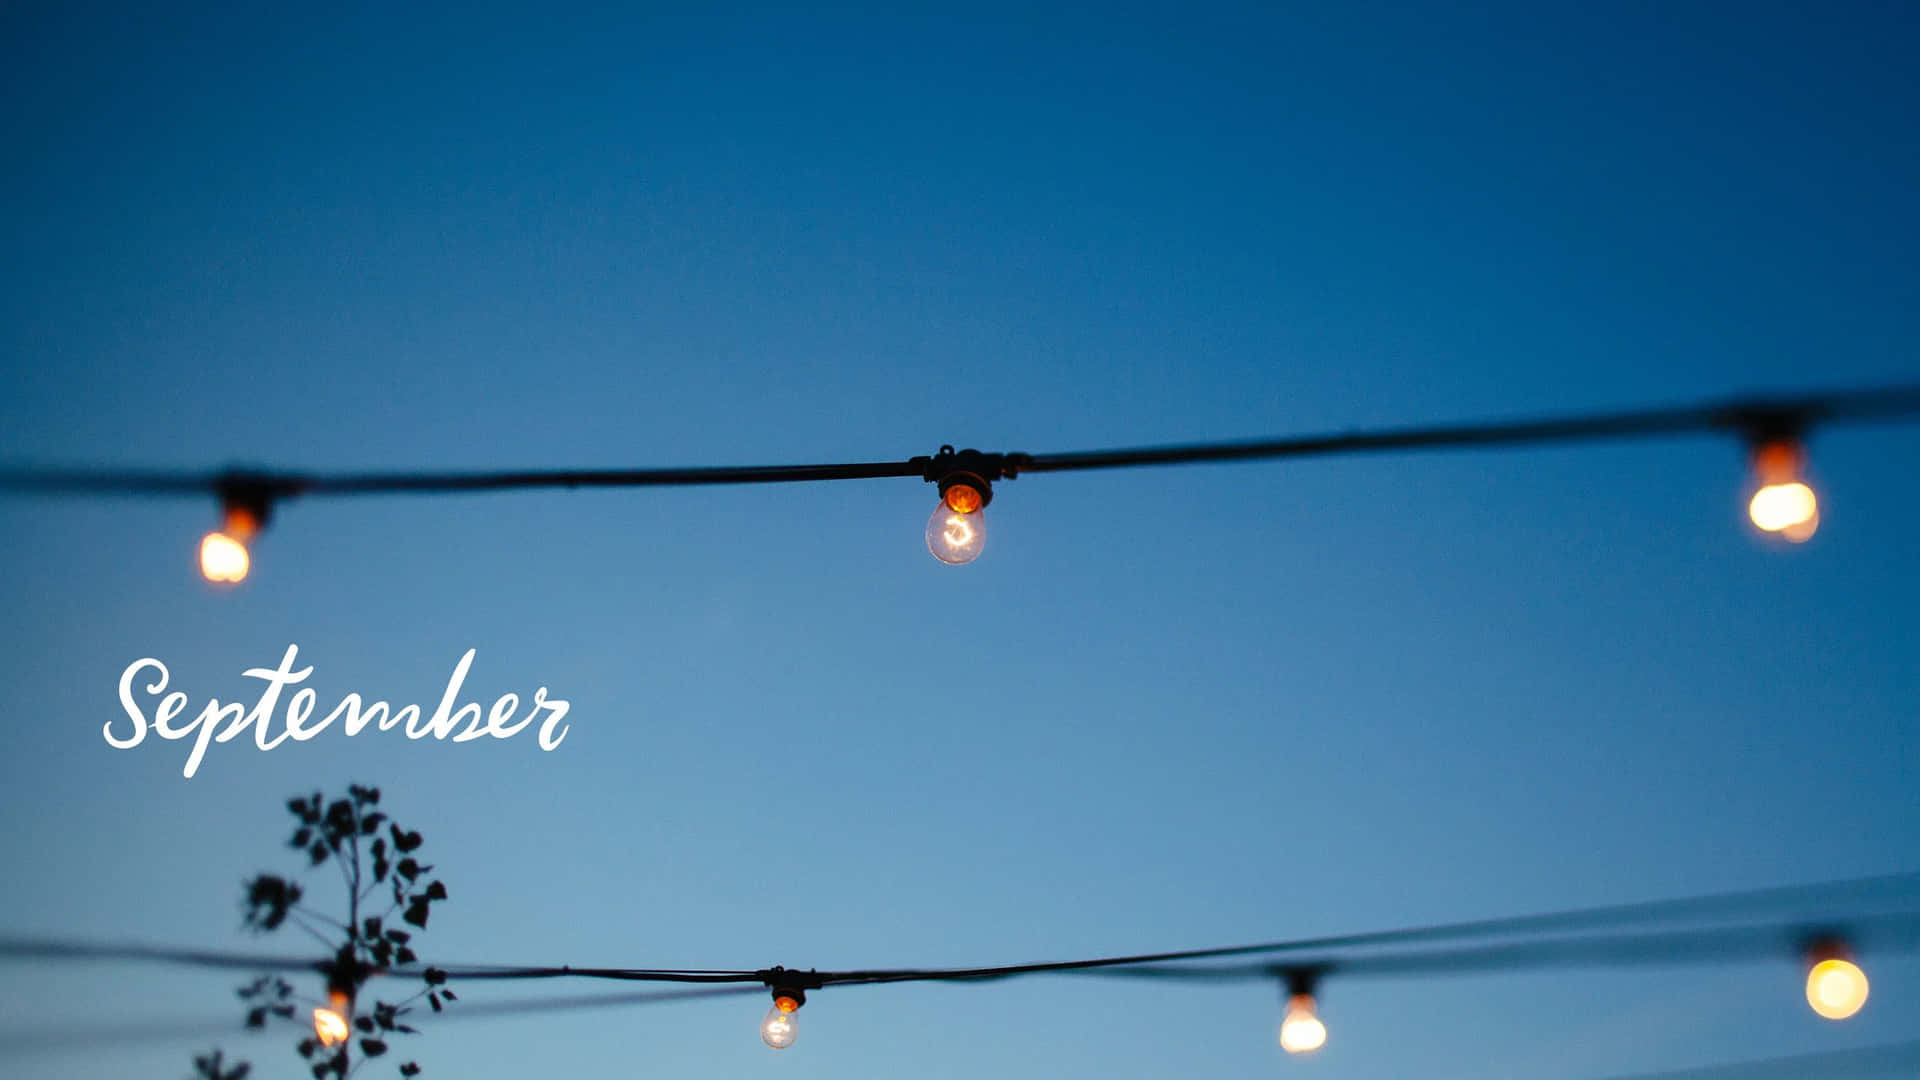 A String Of Lights With The Words September